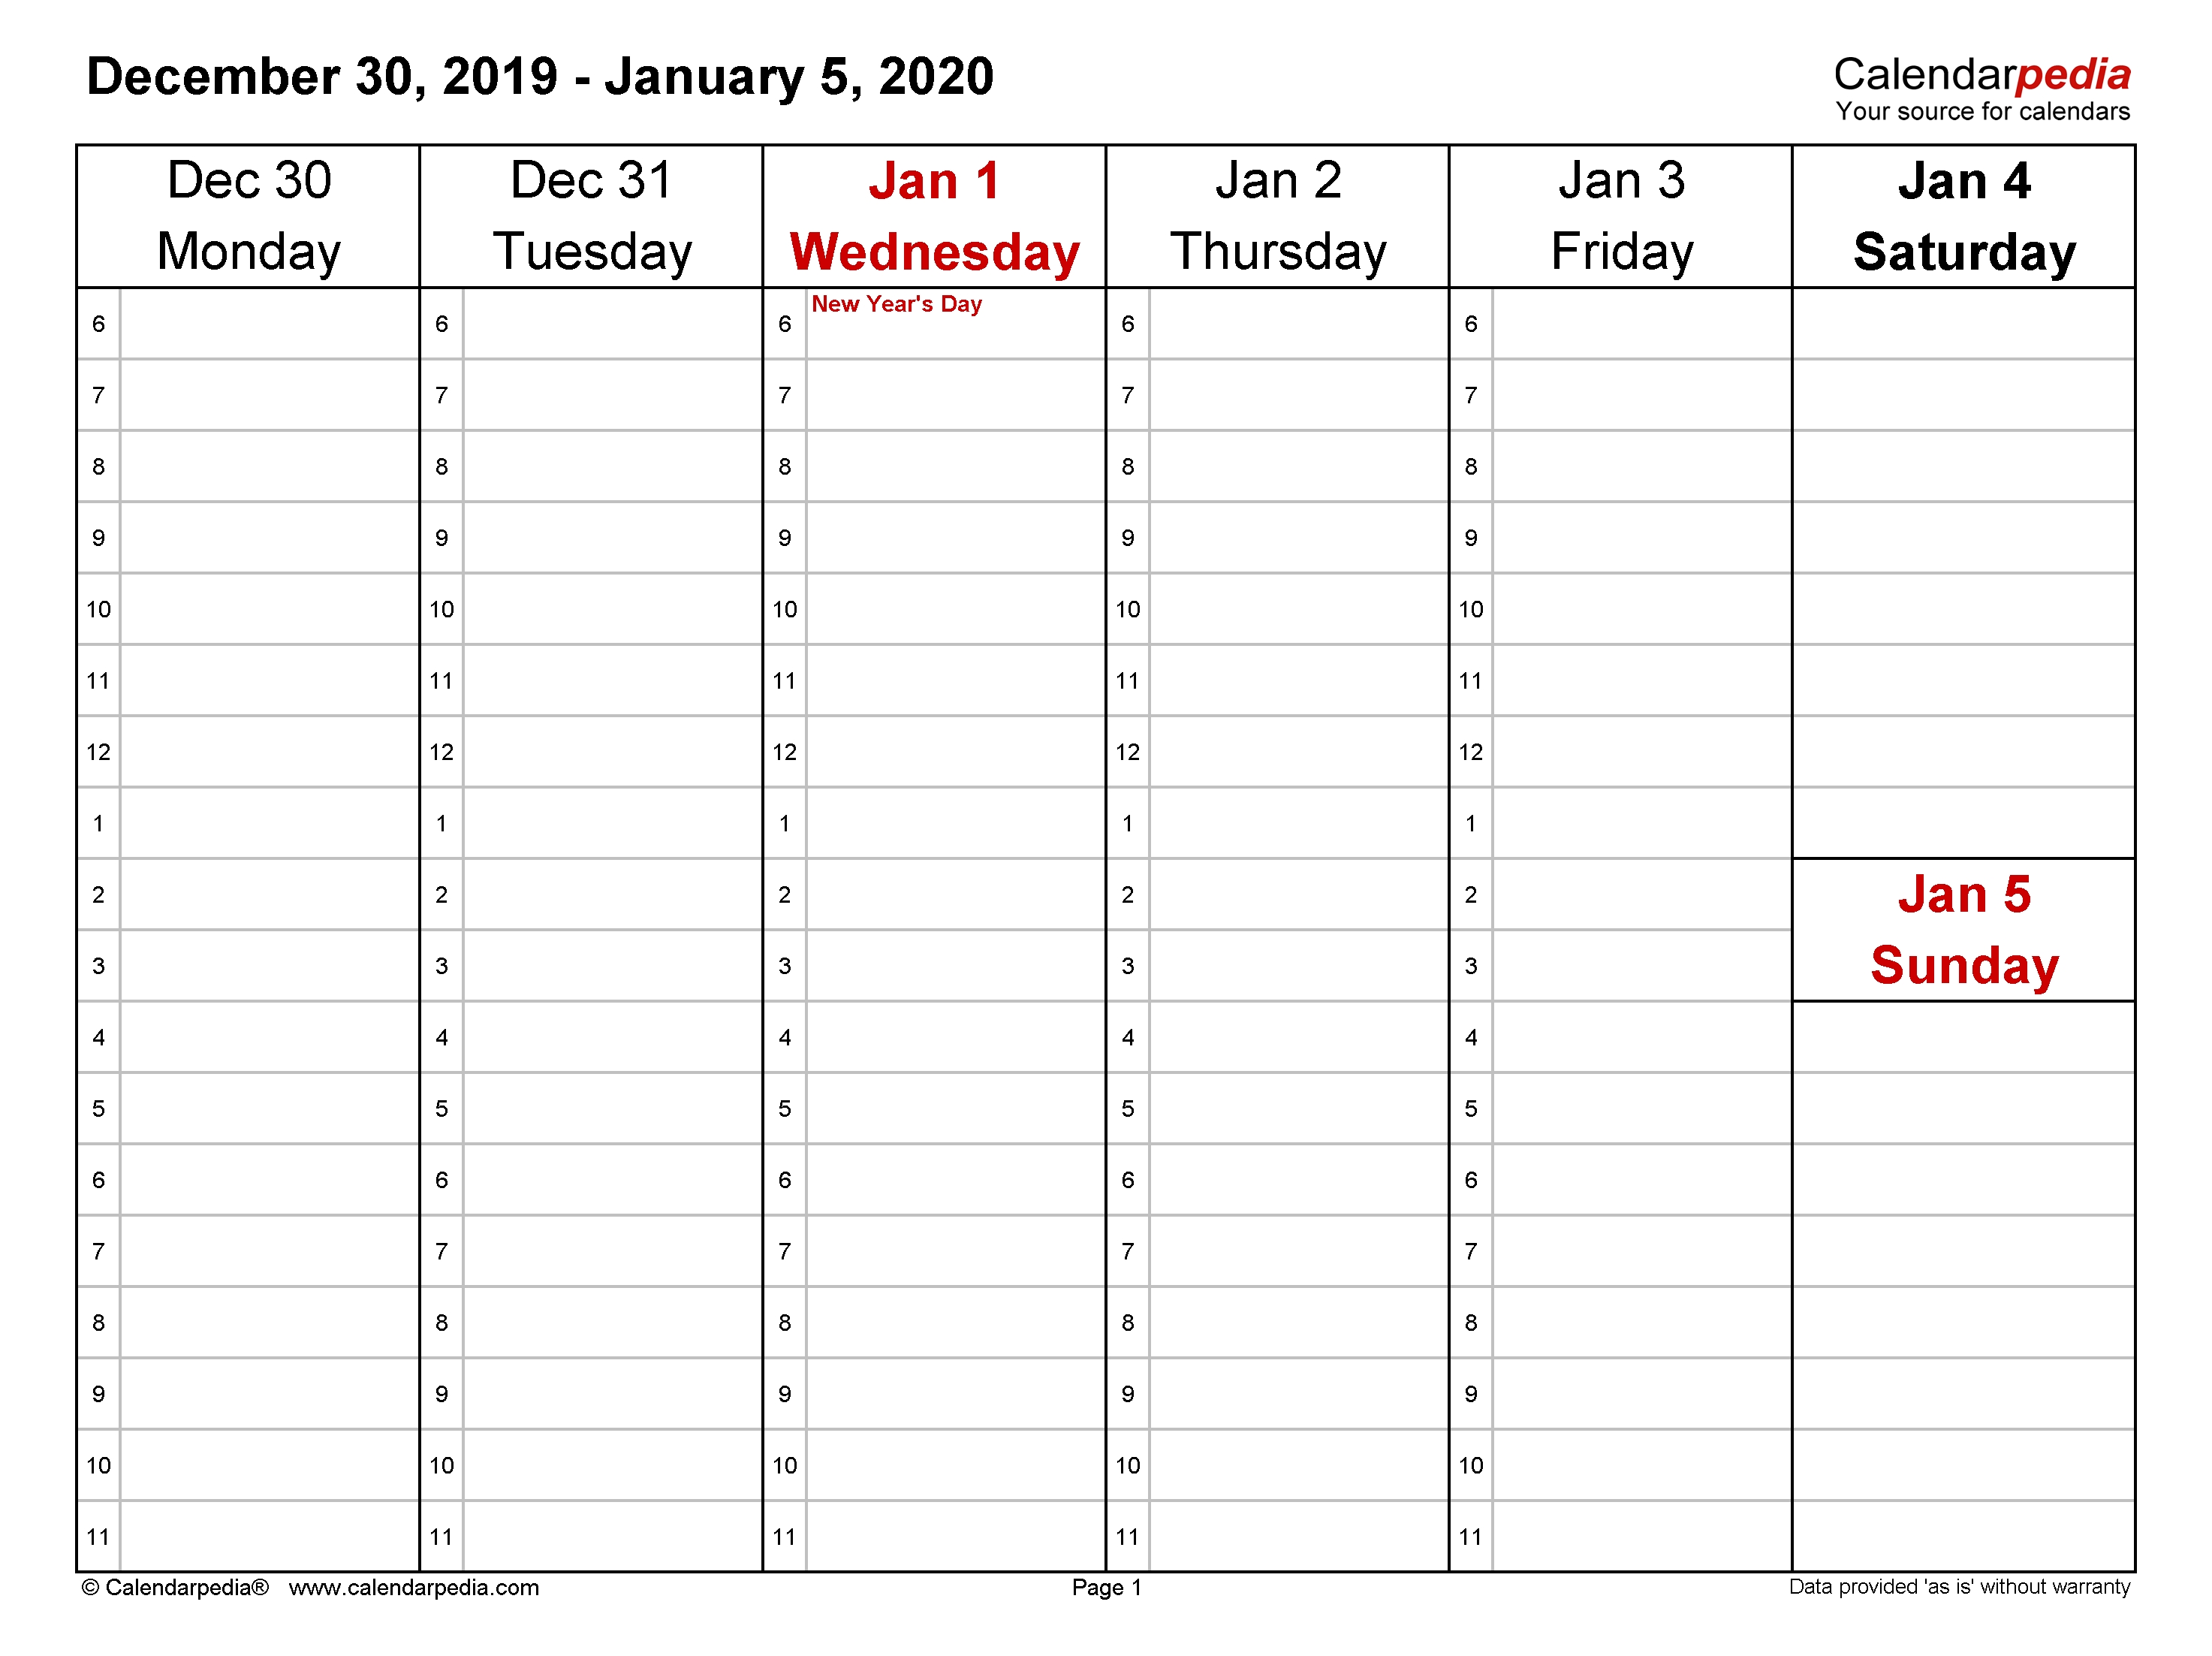 Weekly Calendars 2020 For Word - 12 Free Printable Templates